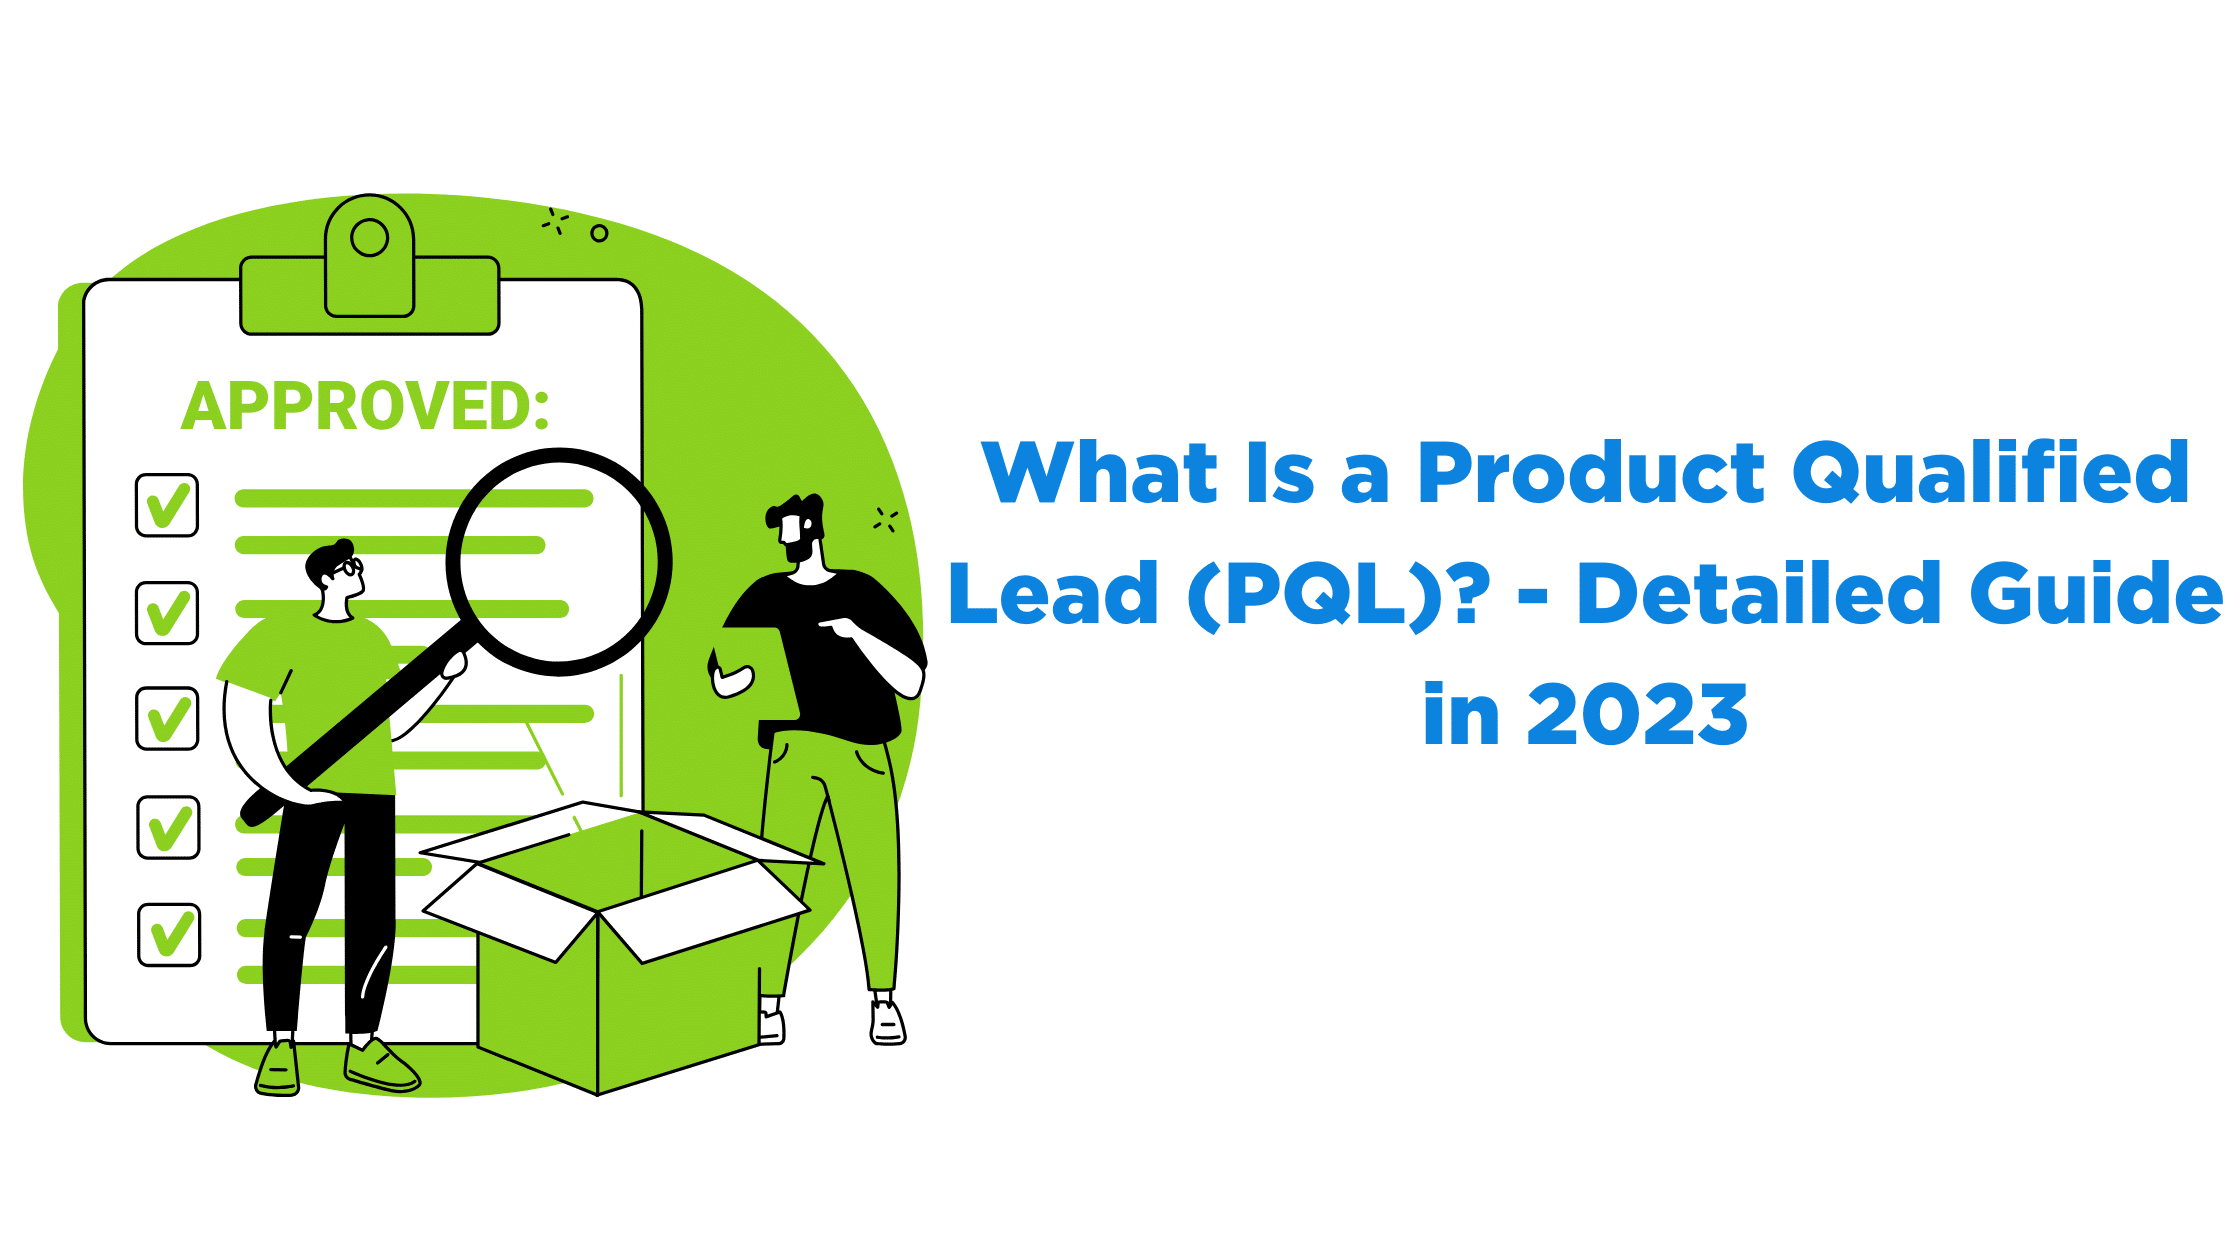 What Is a Product Qualified Lead (PQL)? - Detailed Guide in 2023